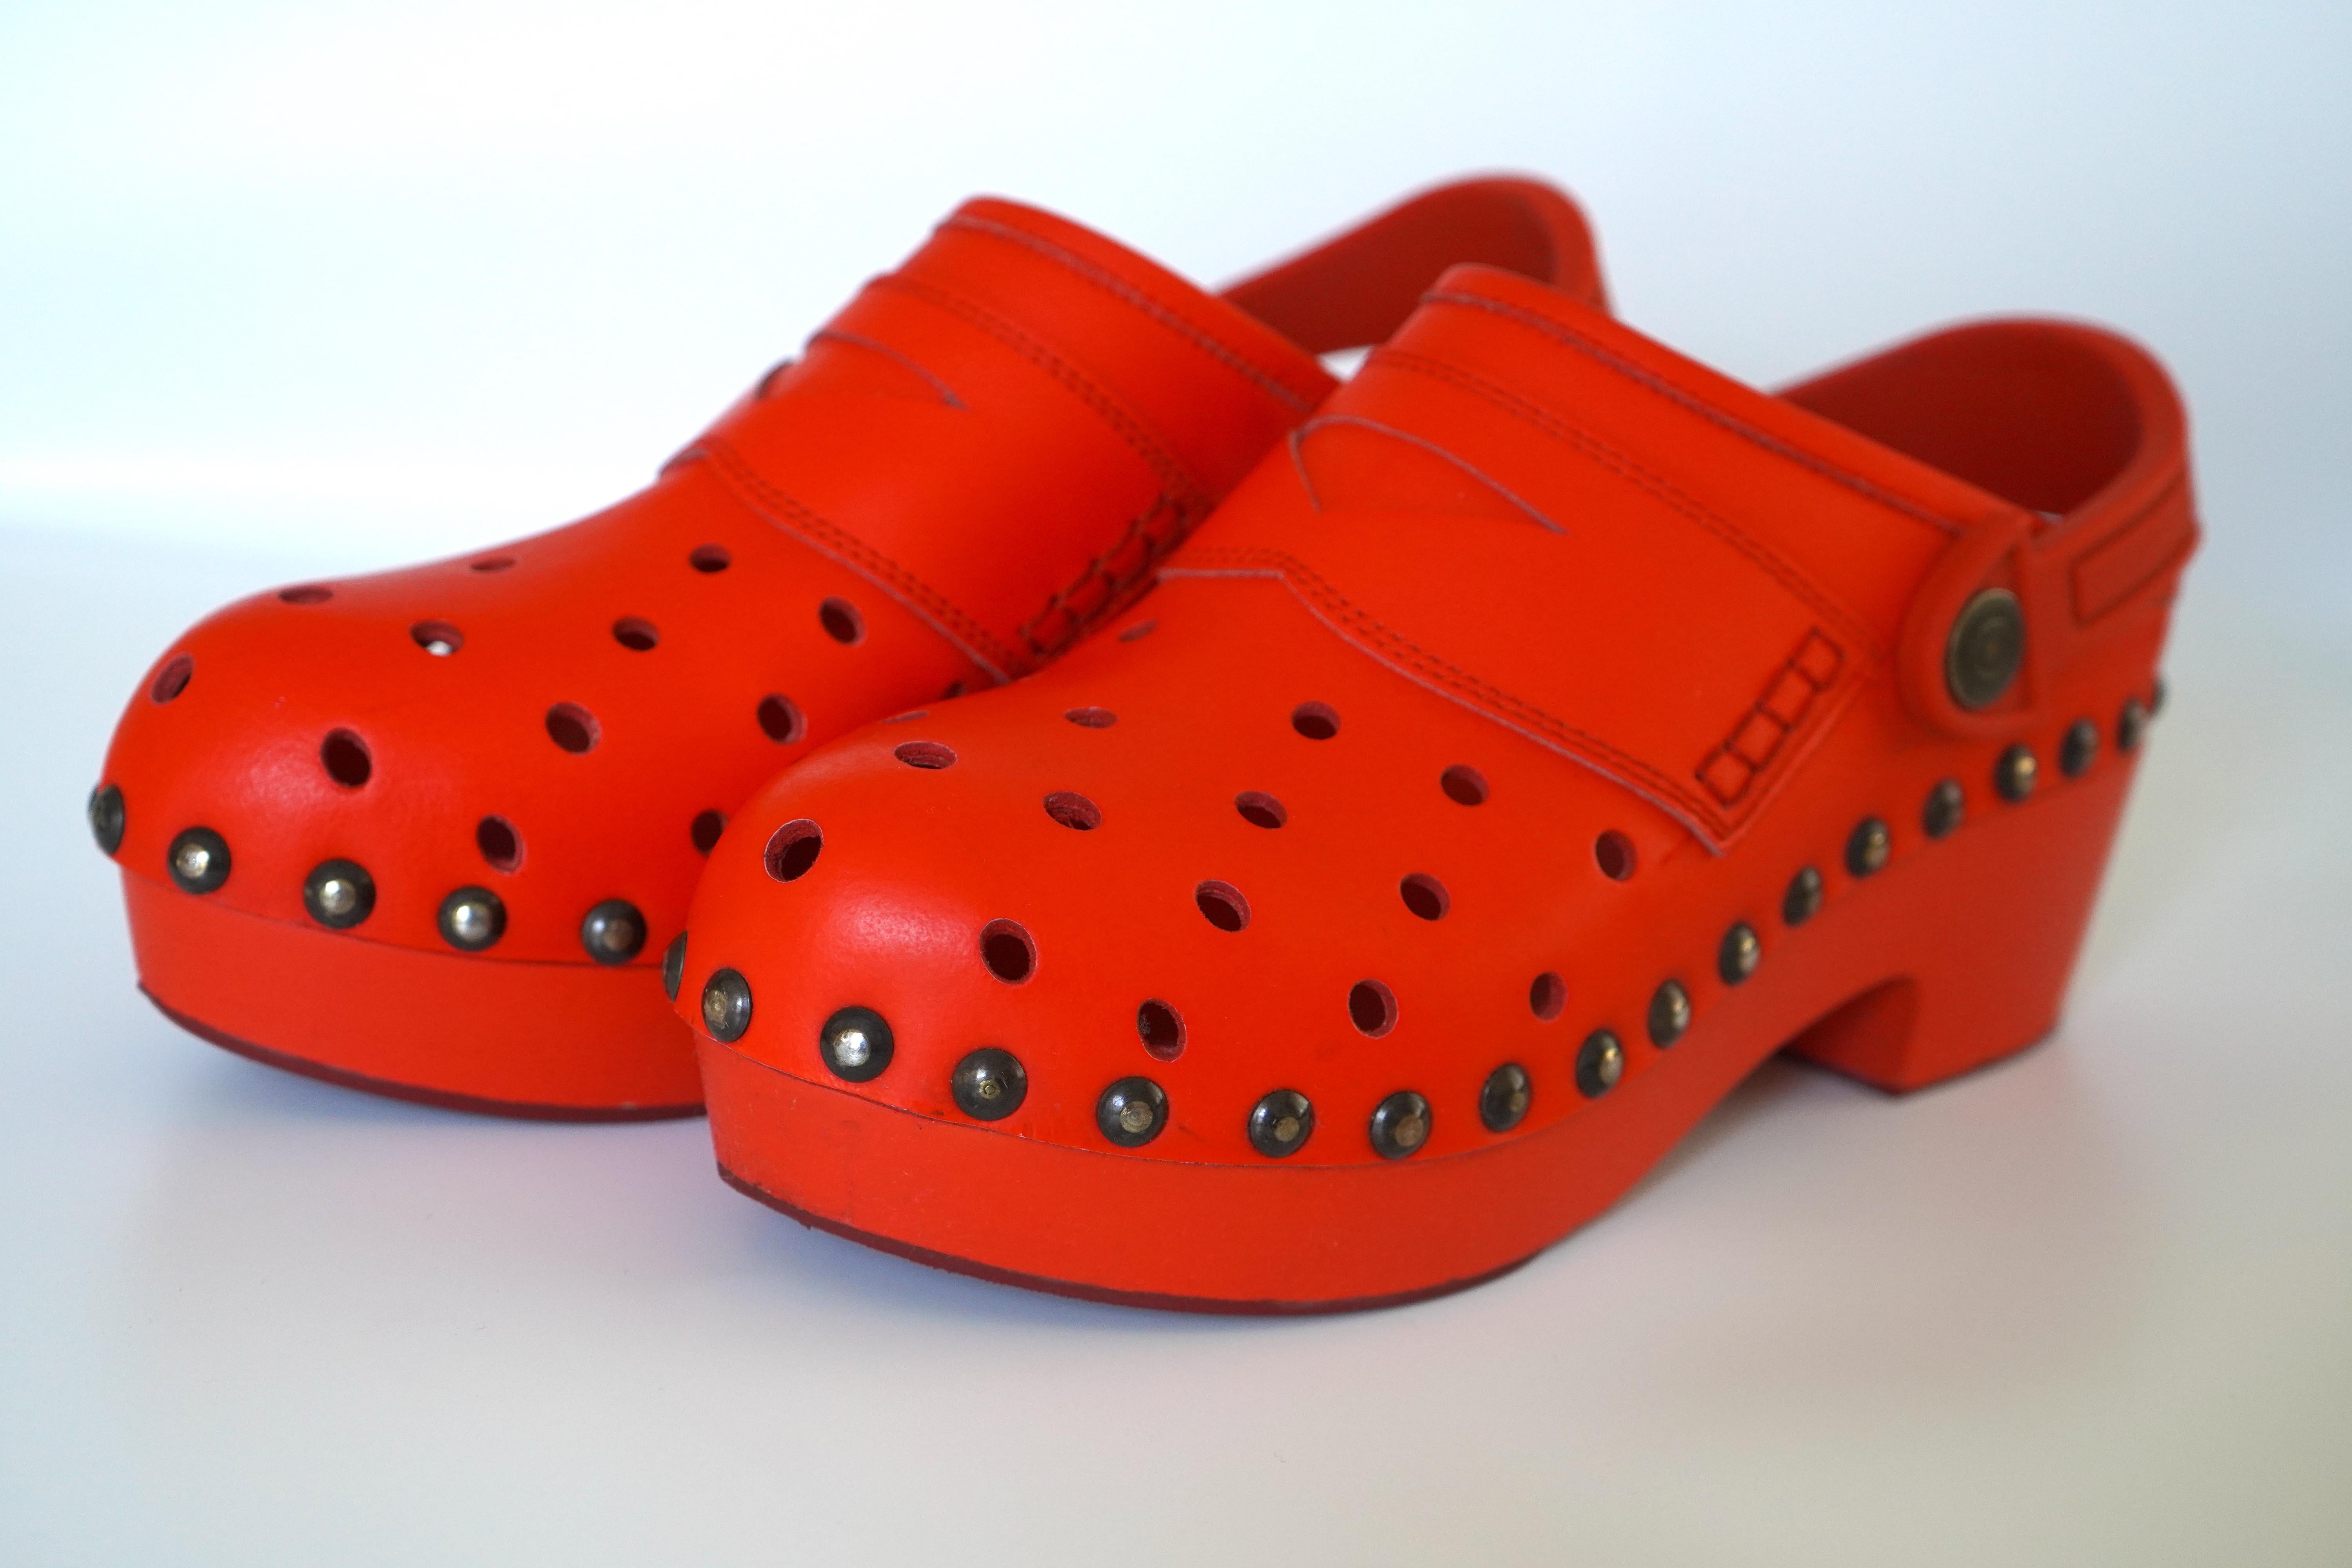 Maison Margiela Red Leather Platform Croc Clogs in size 39. These shoes feature perforated leather similar to the look of Crocs, but with the style of clogs. They also have studs along the shoe where the platform and sole of the shoe meet. They come